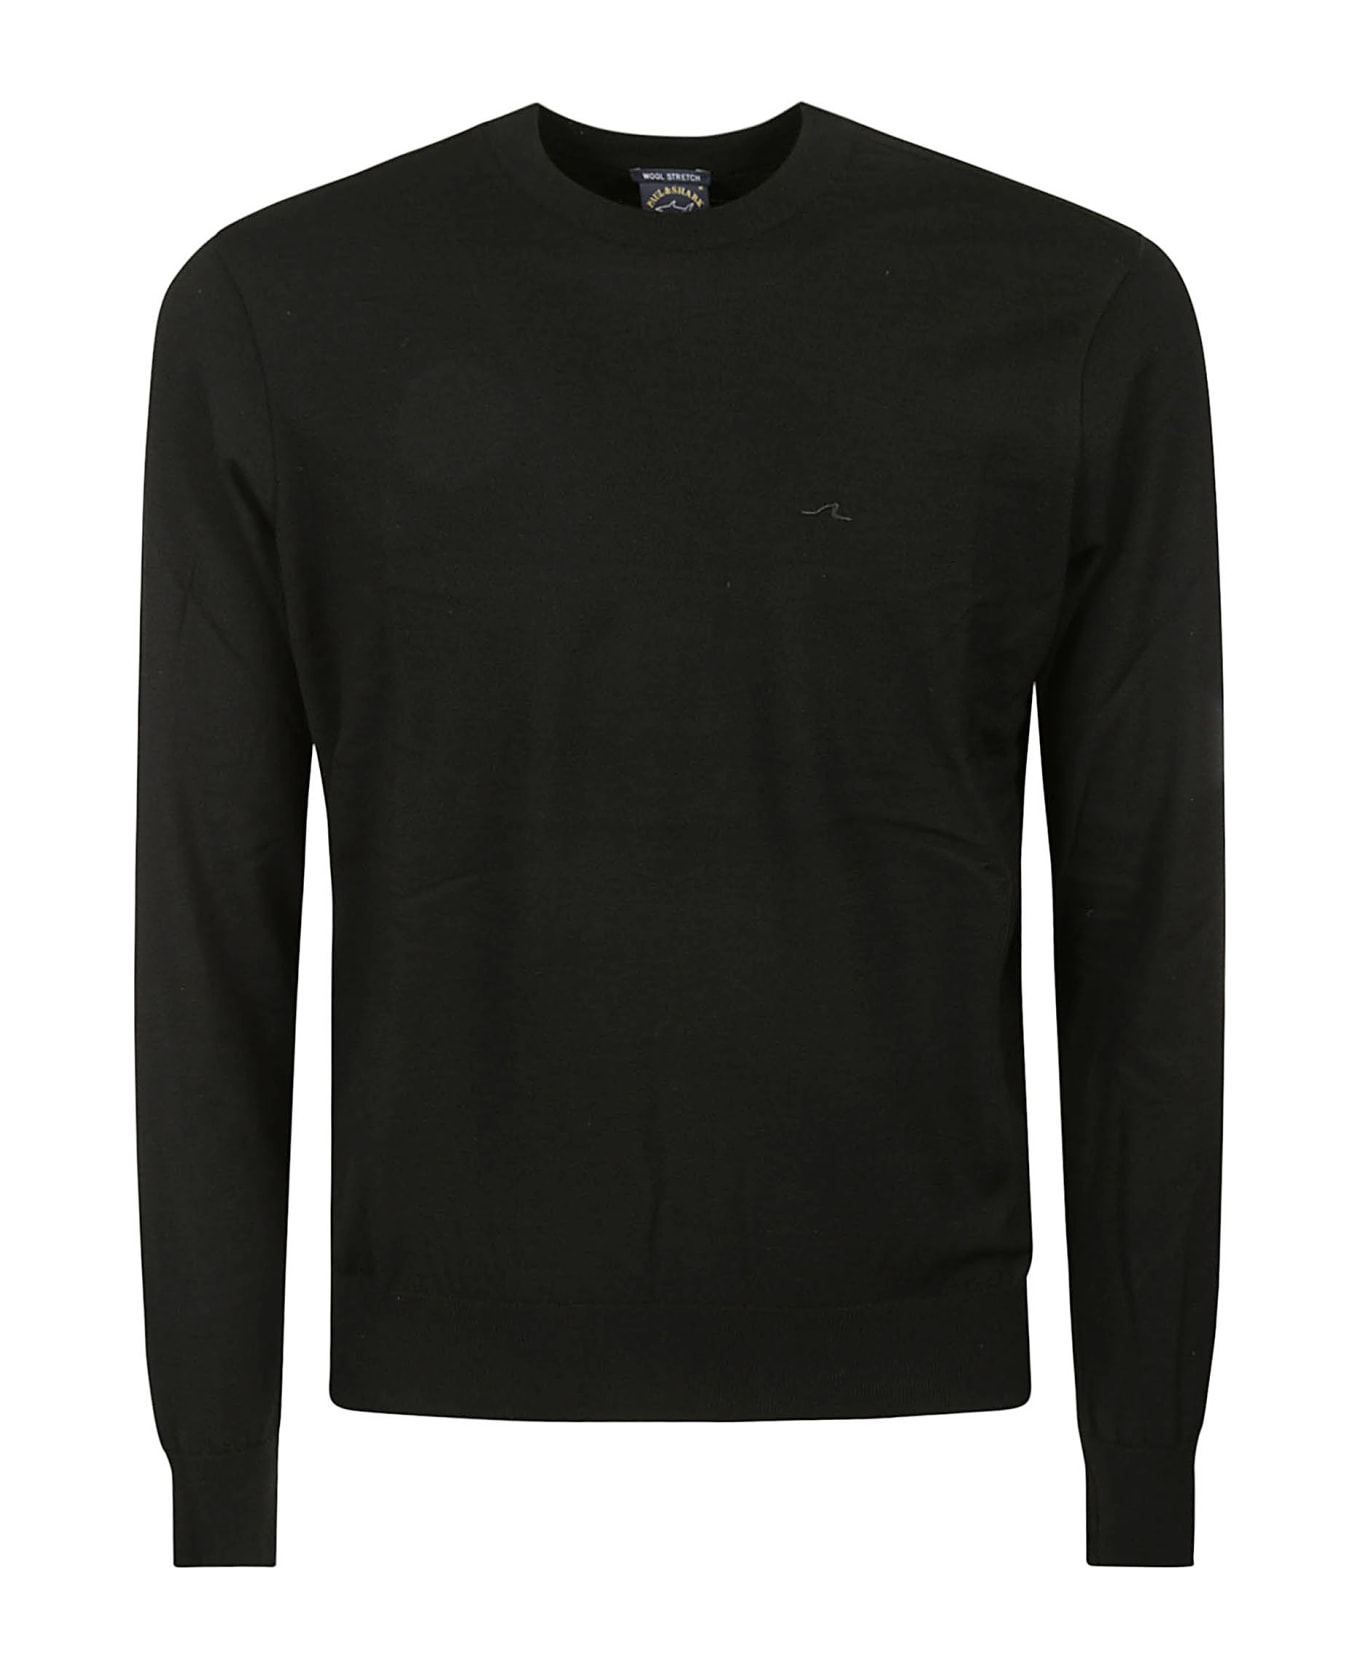 Paul&Shark Wool Stretch Crewneck With Embroidery - Black